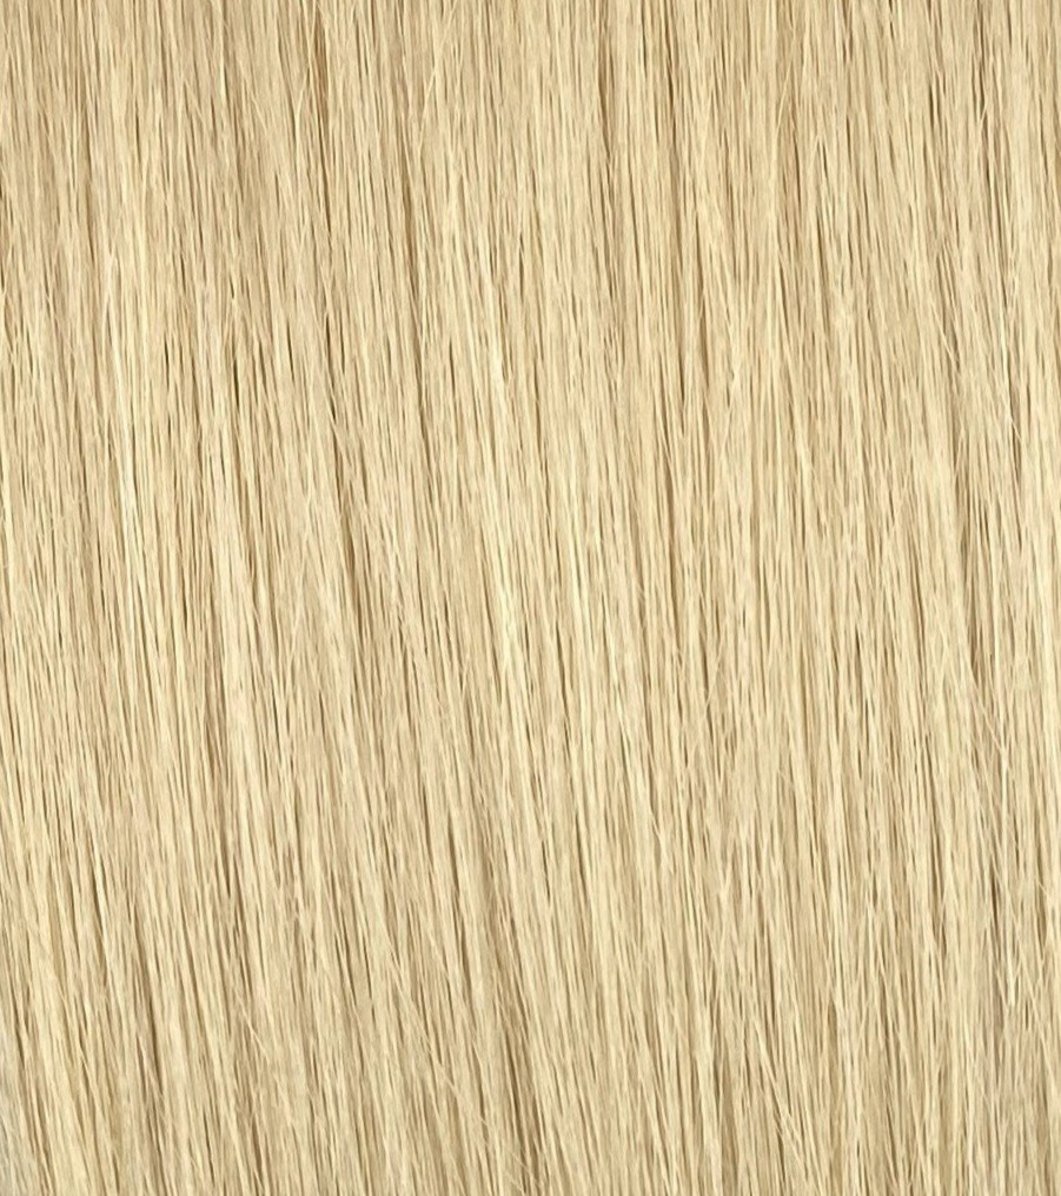 Weft hair extensions #1002 -Double - 20 inches - Very Light Ash Blonde Weft DR Hair Products Co 